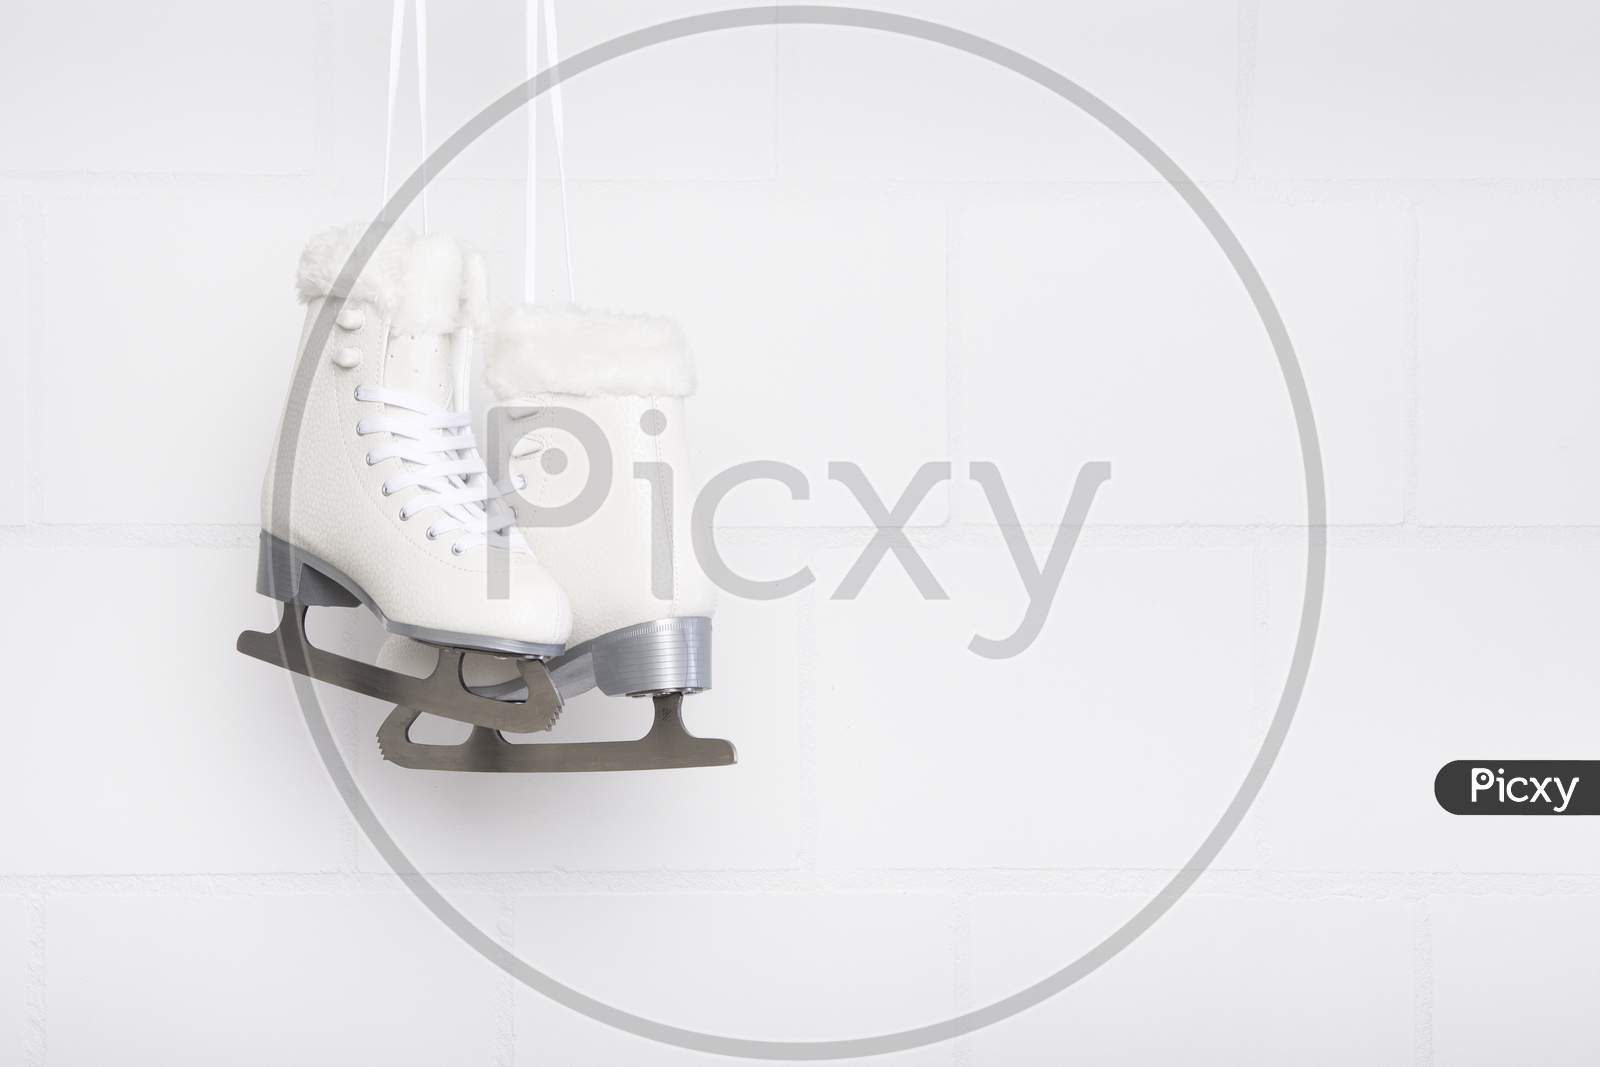 Pair Of White Figure Skates For Females Hanging At A White Concrete Background With Space For Copy